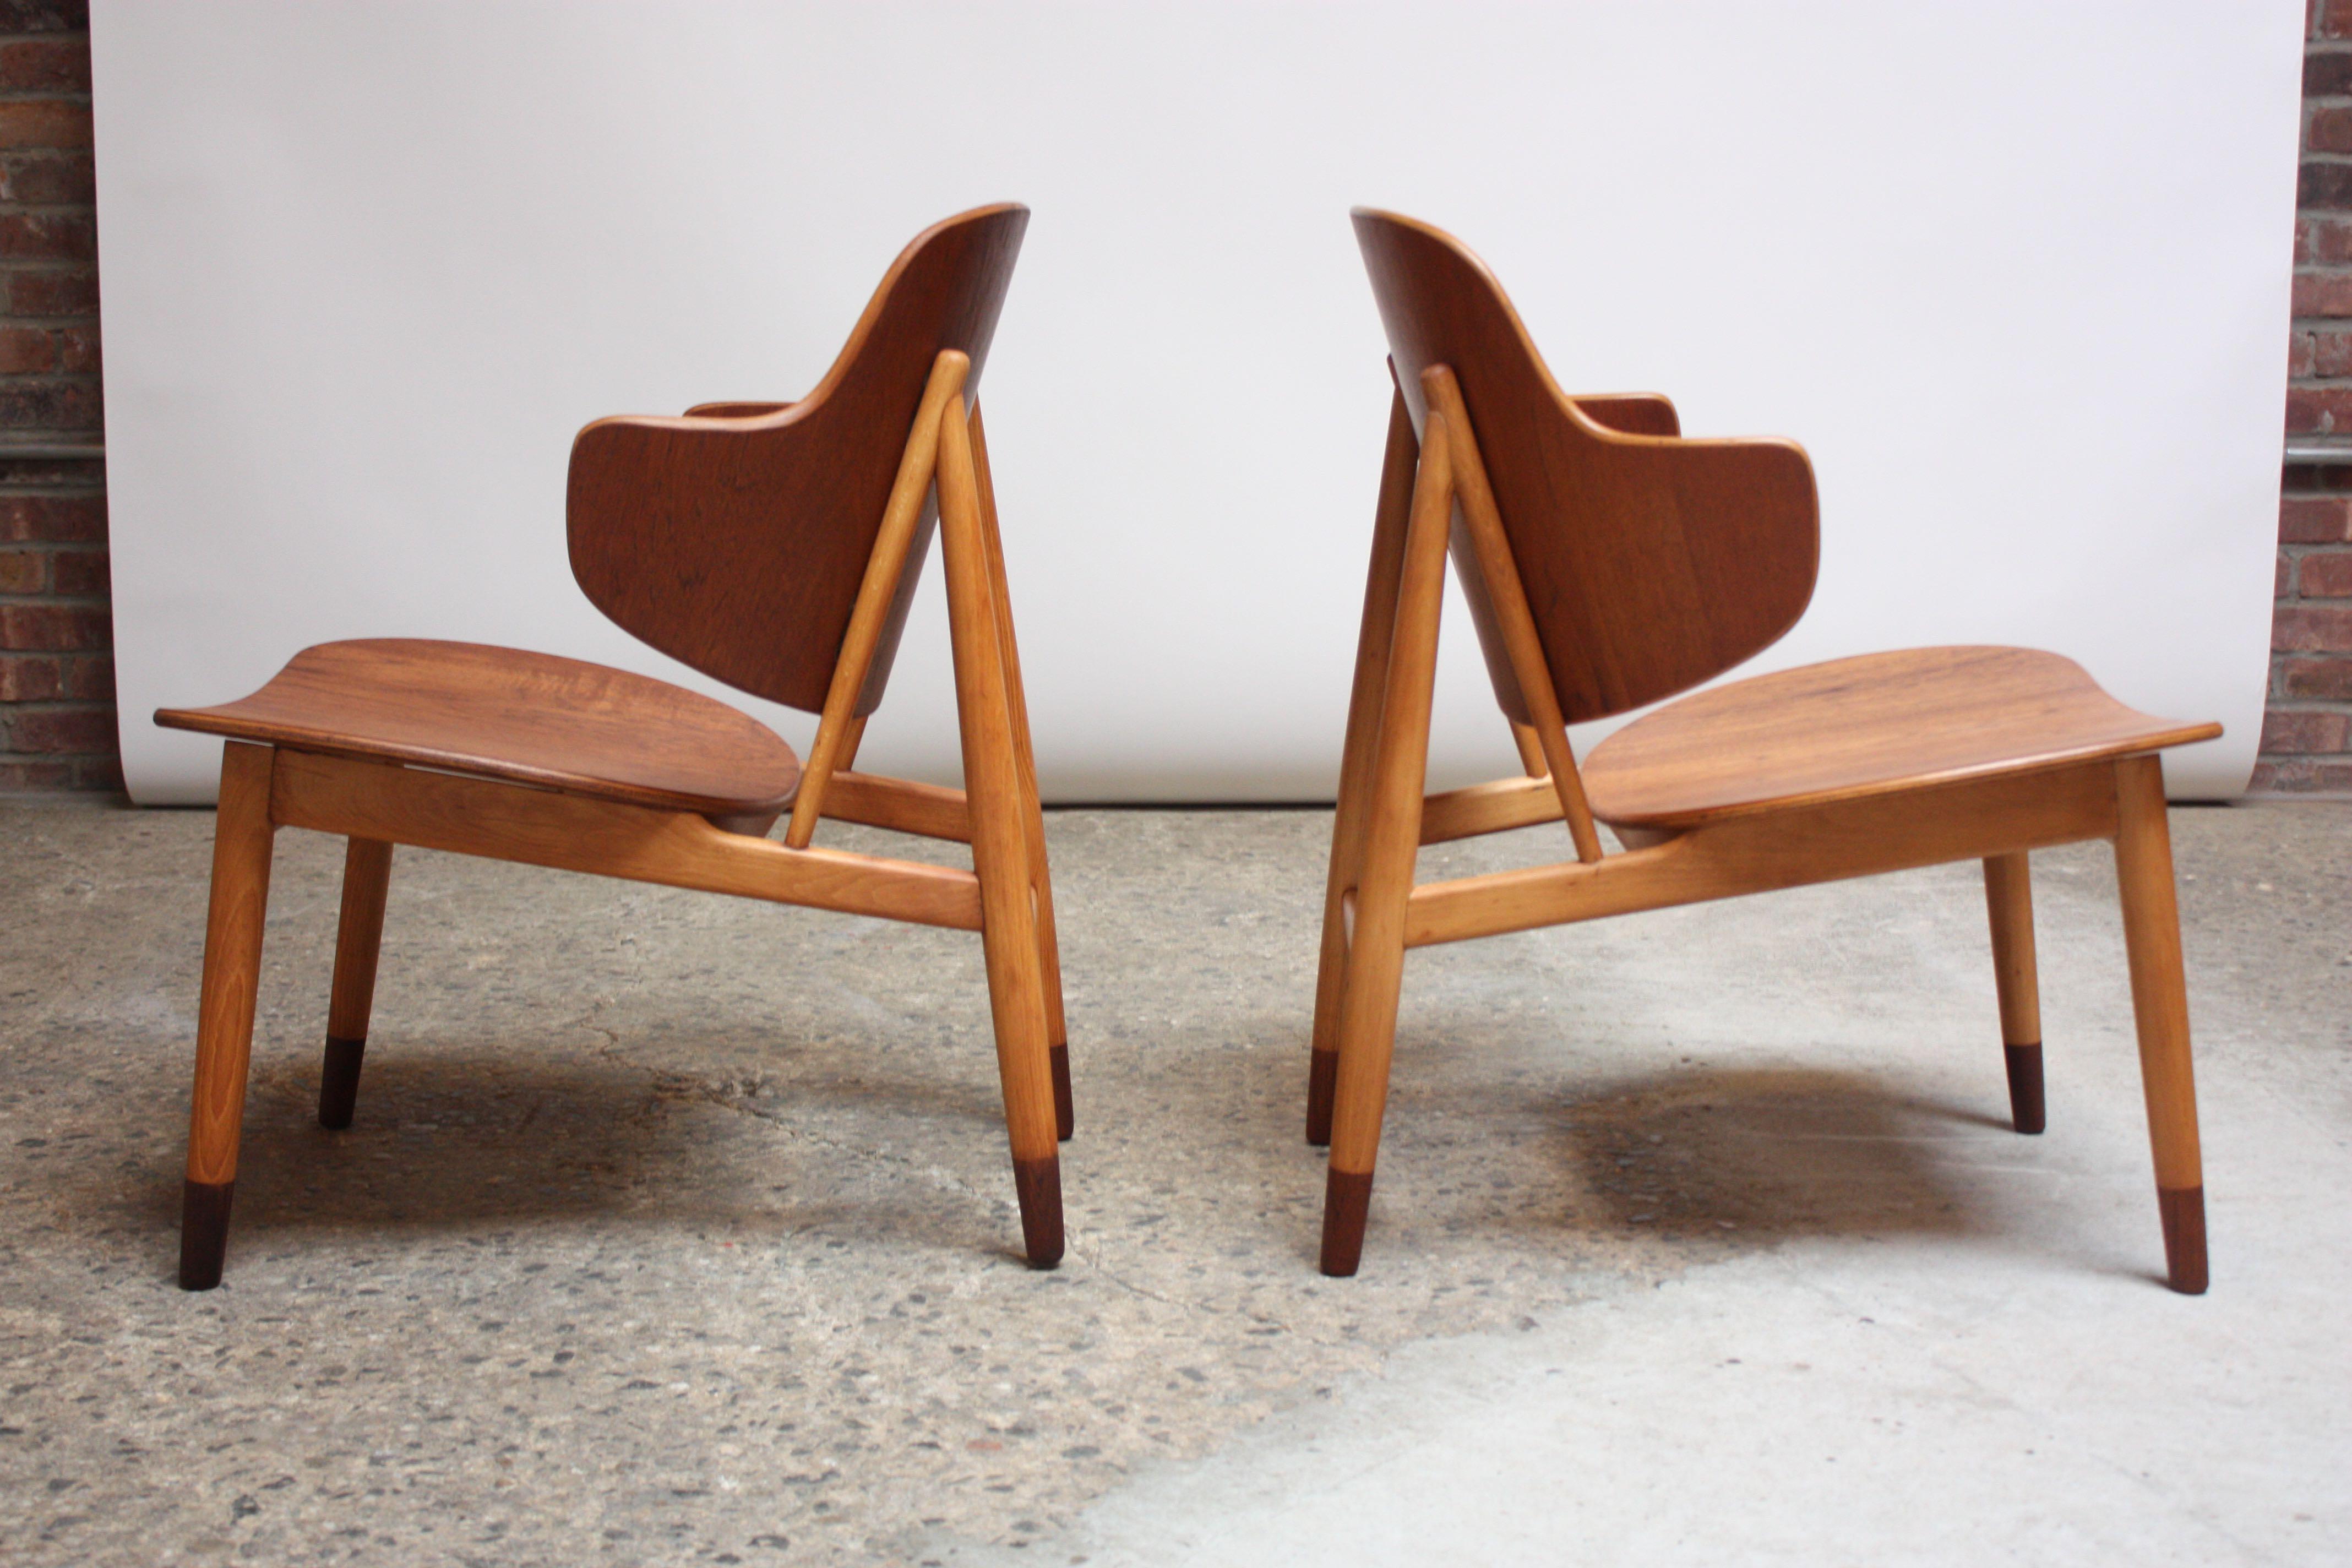 Pair of Danish Sculptural Shell Chairs by Ib Kofod-Larsen in Teak and Beech For Sale 4